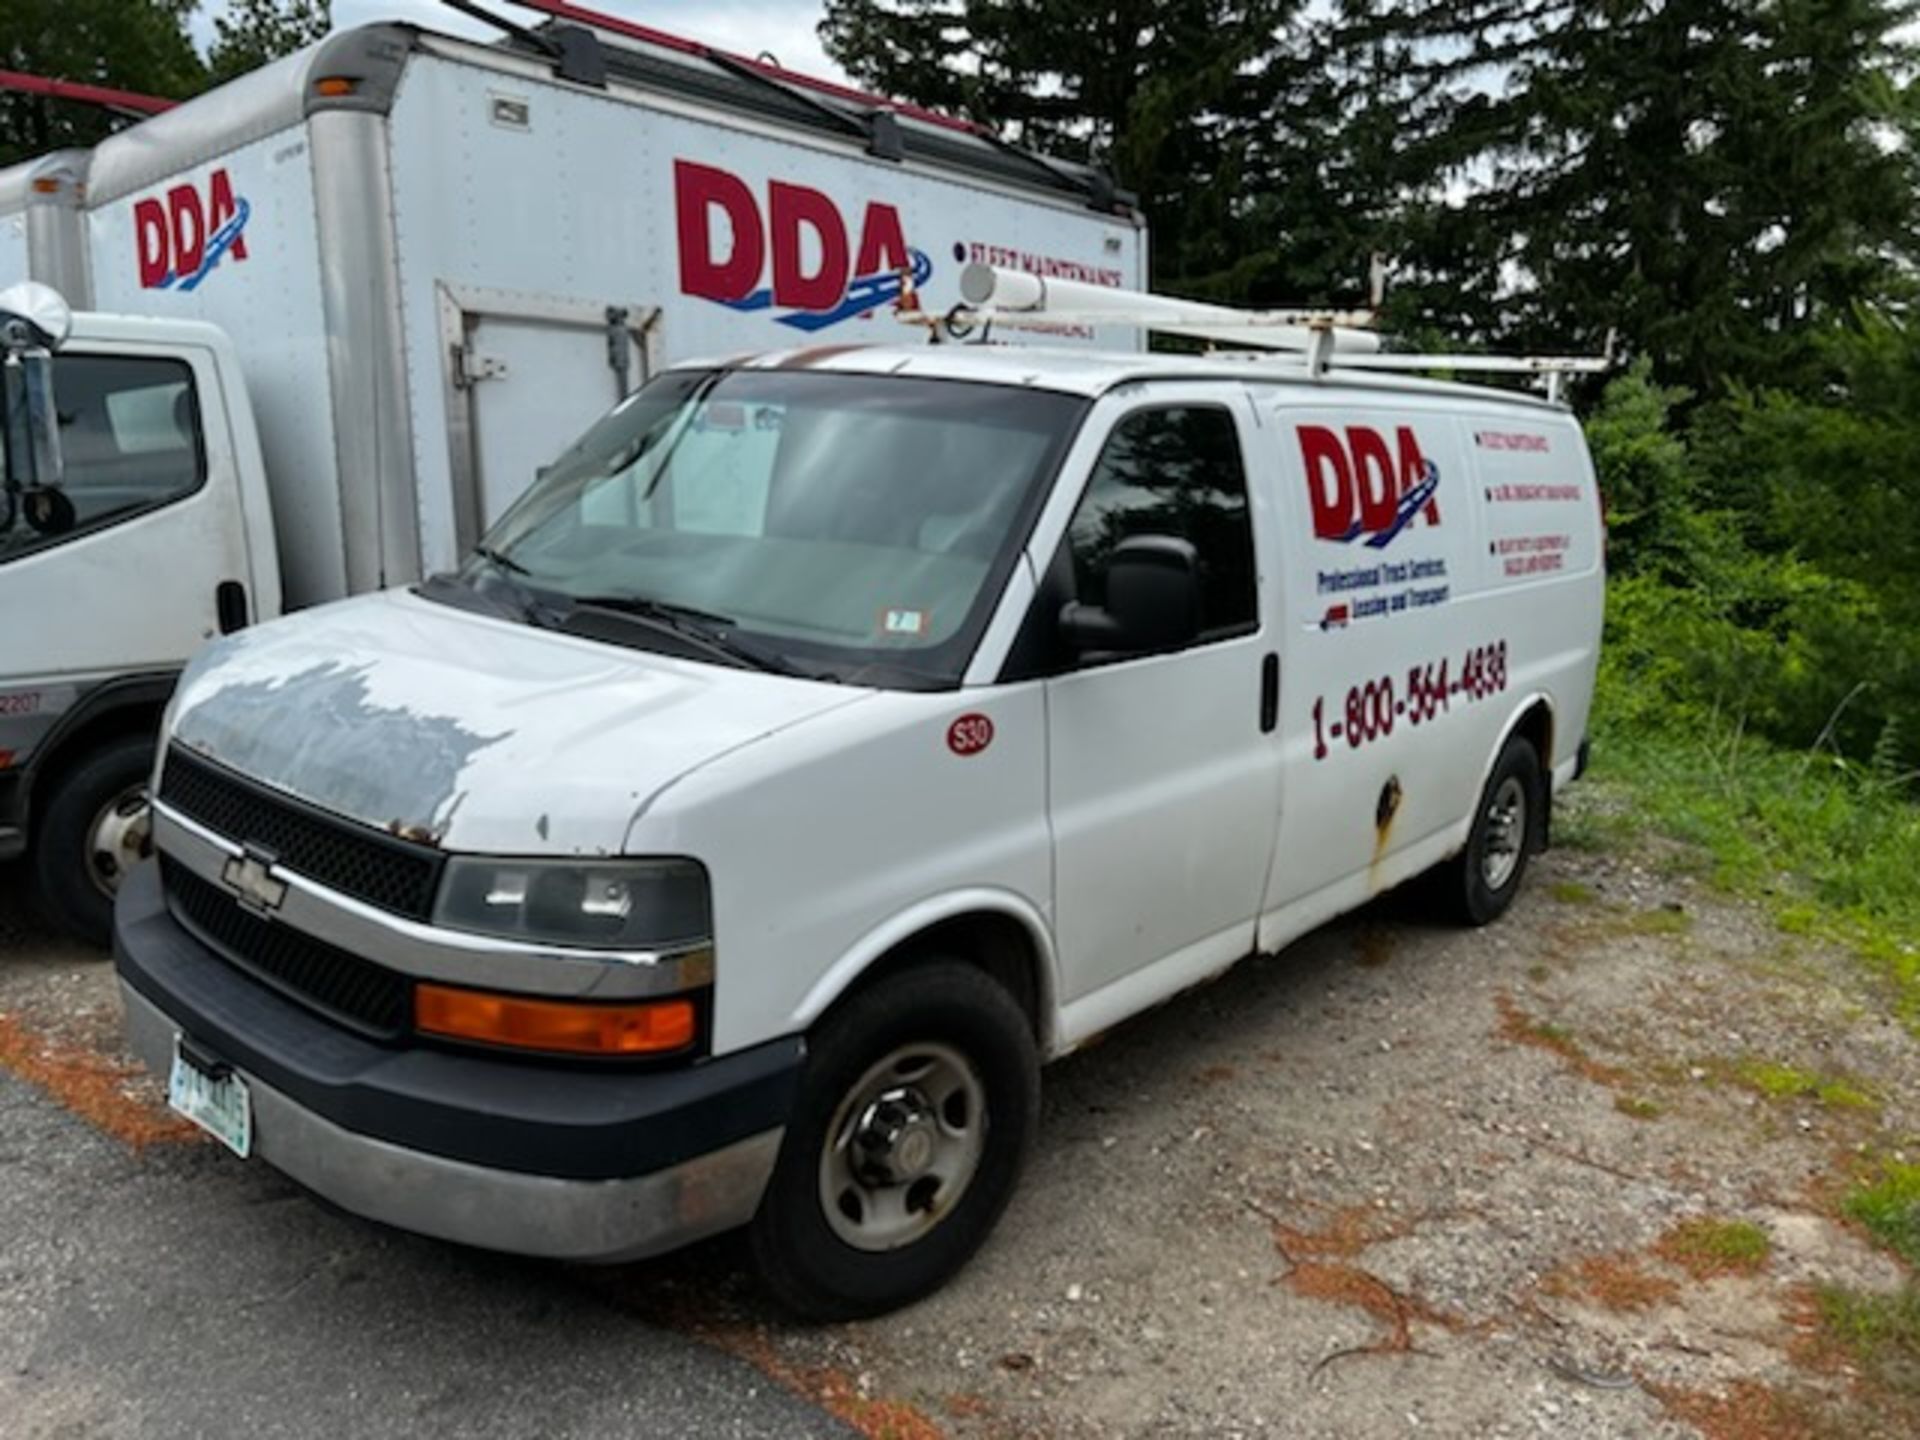 2006 Chevrolet Express Van 2500, Automatic Transmission, Gas, Curbside Slider w/Glass, Rear Barn Doo - Image 2 of 3